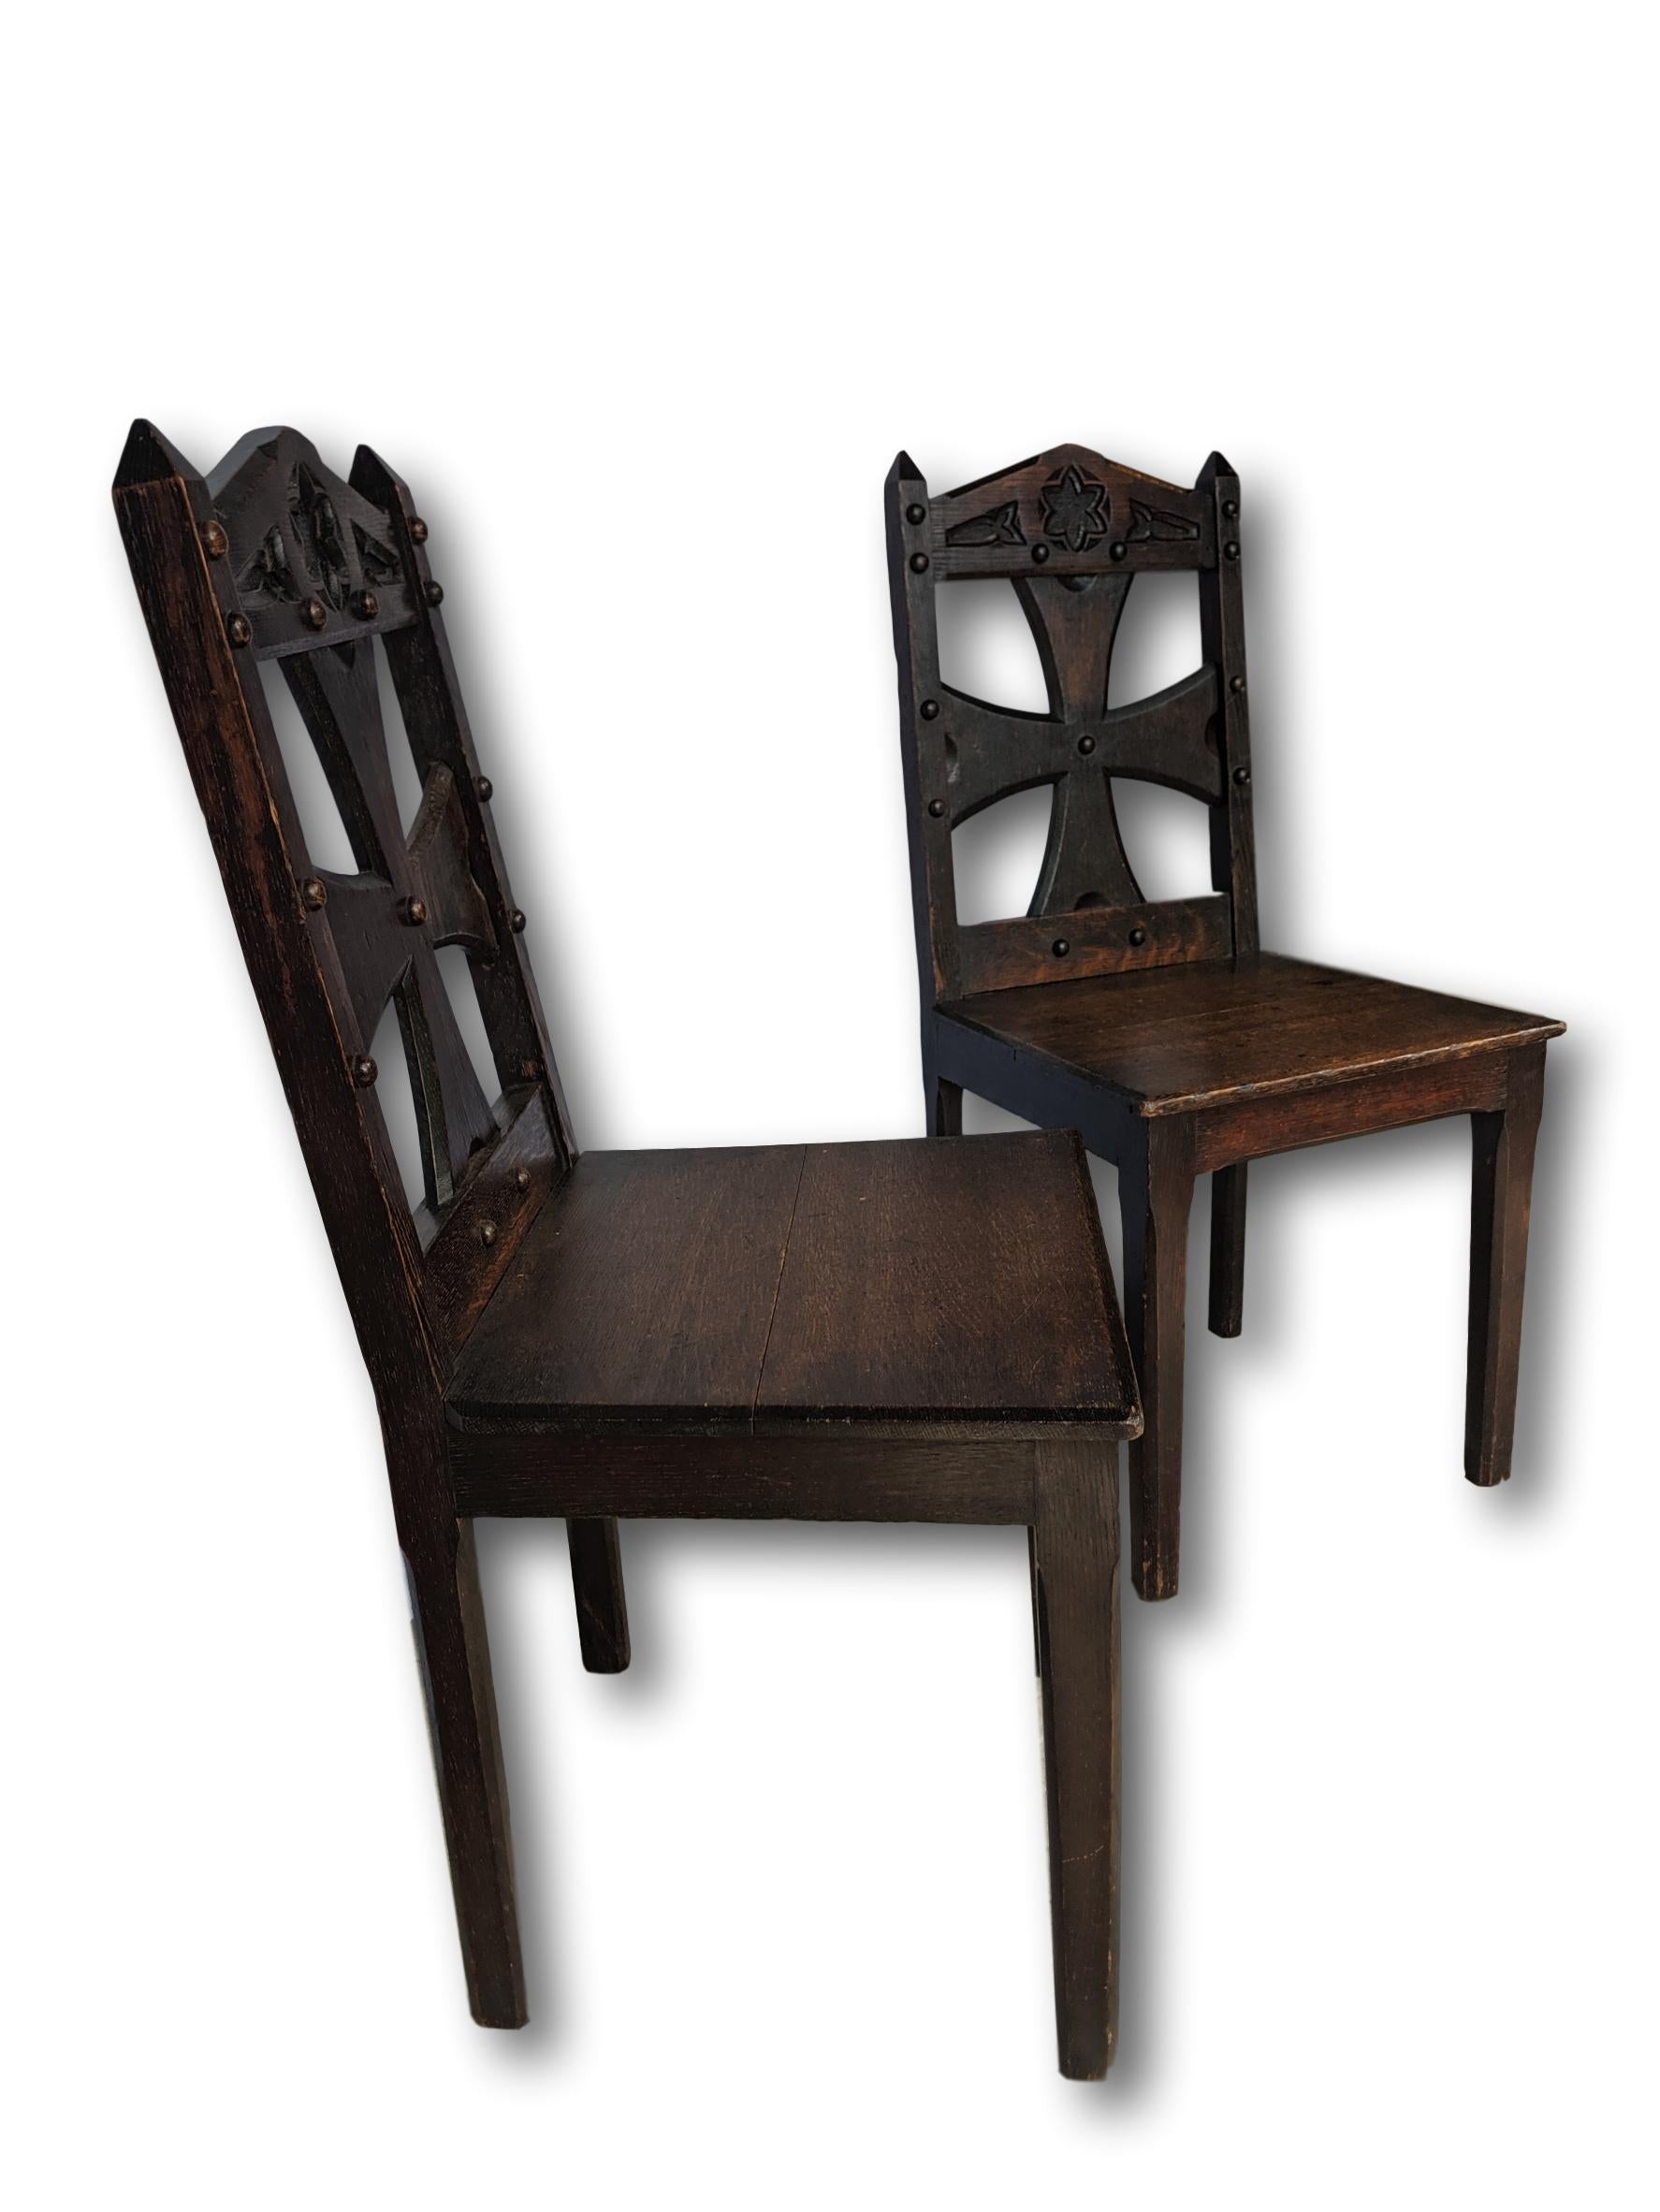 Pair of hand carved oak Gothic chairs, Arts & Crafts movement, Scottish, circa 1880. Highest quality antique chairs with lovely, warm patina. Sturdy and ready for use.